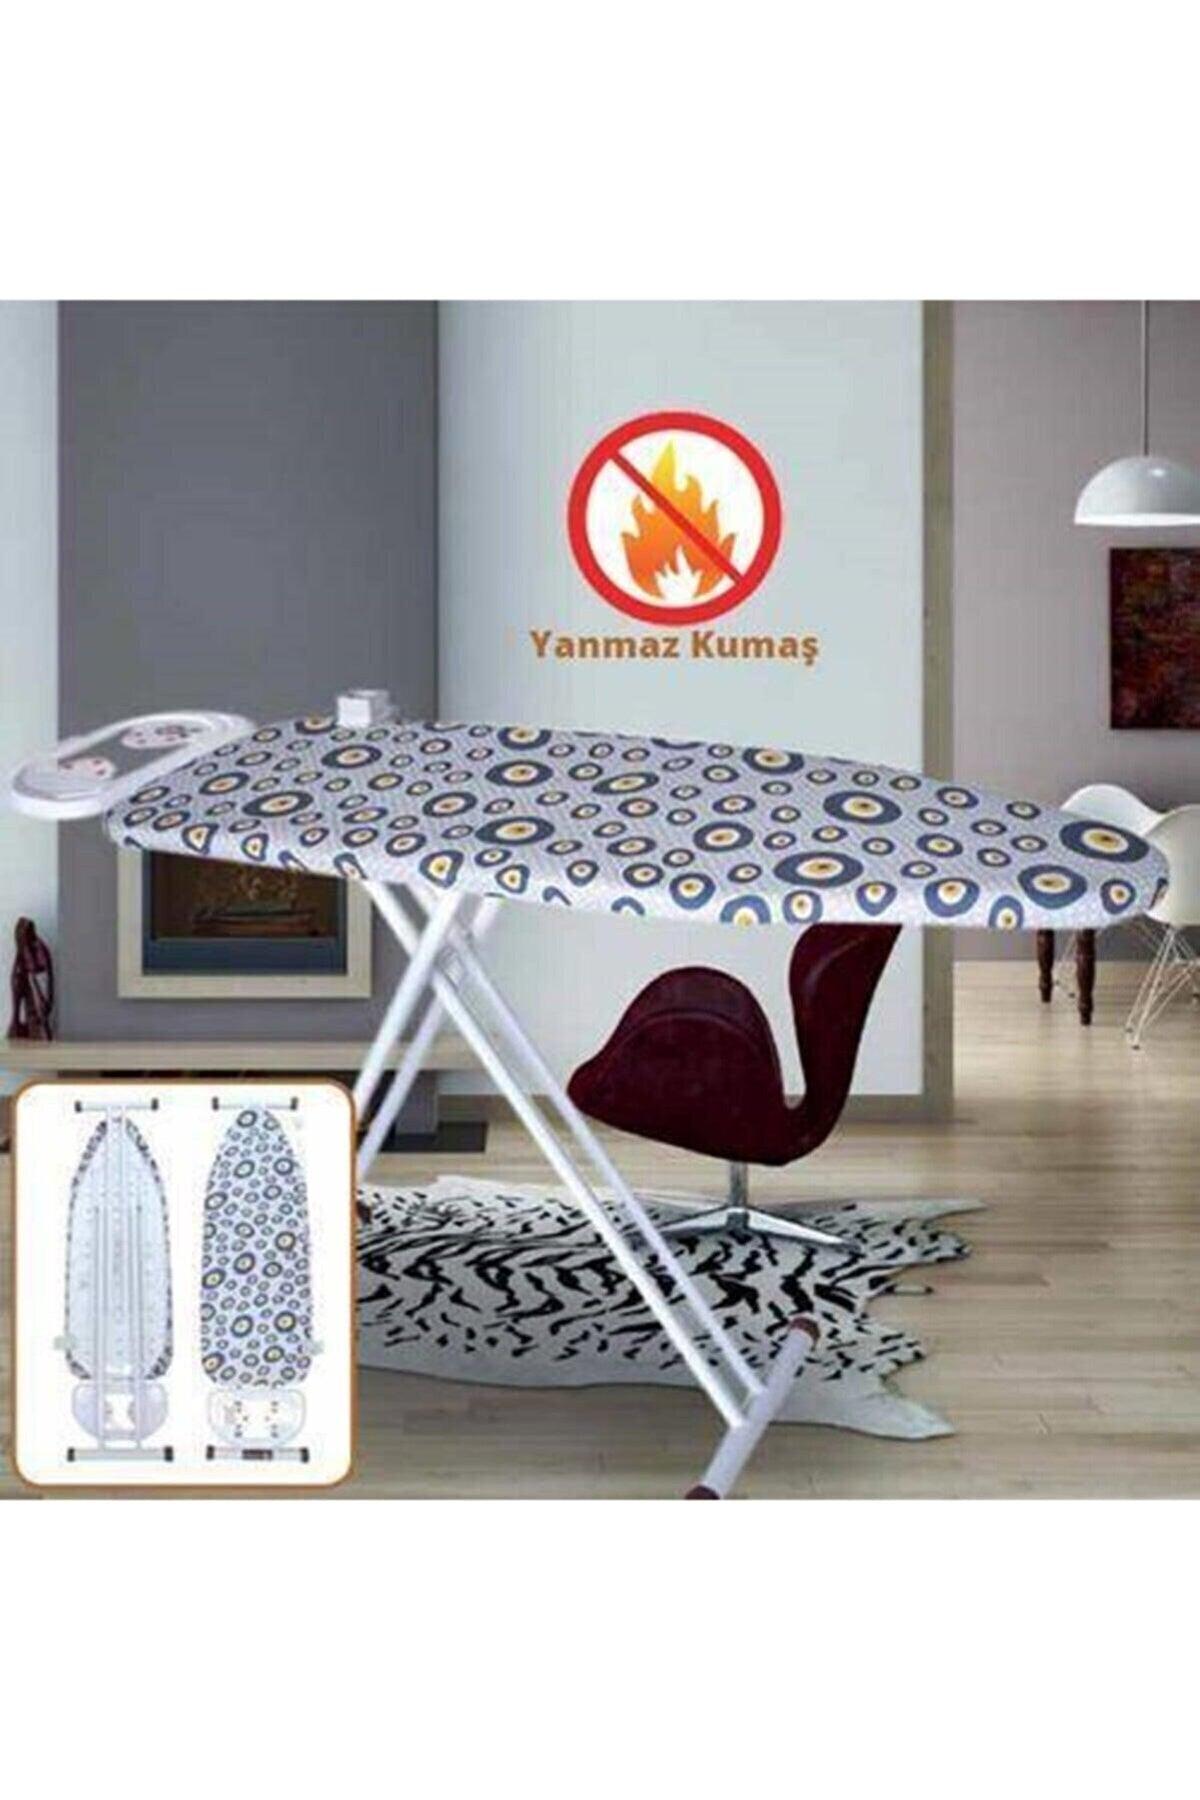 Fireproof Non-Stick Fabric Ironing Material For Ironing